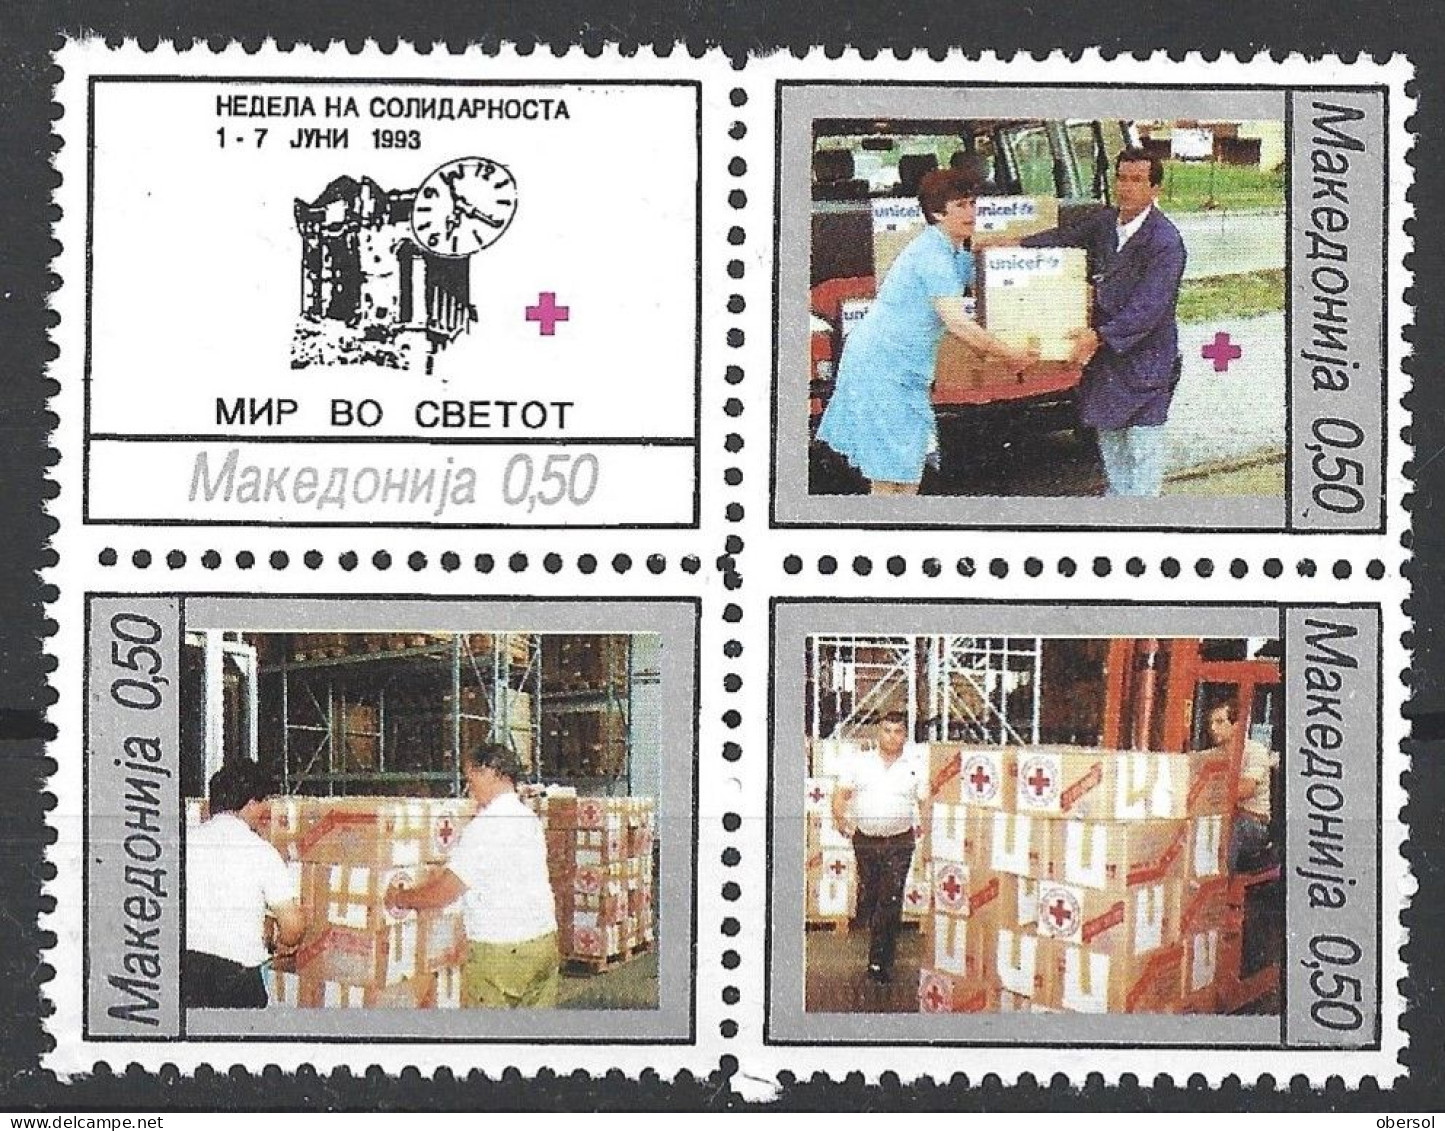 Macedonia 1993 Red Cross Solidarity Complete Block Of Four MNH (2) - North Macedonia